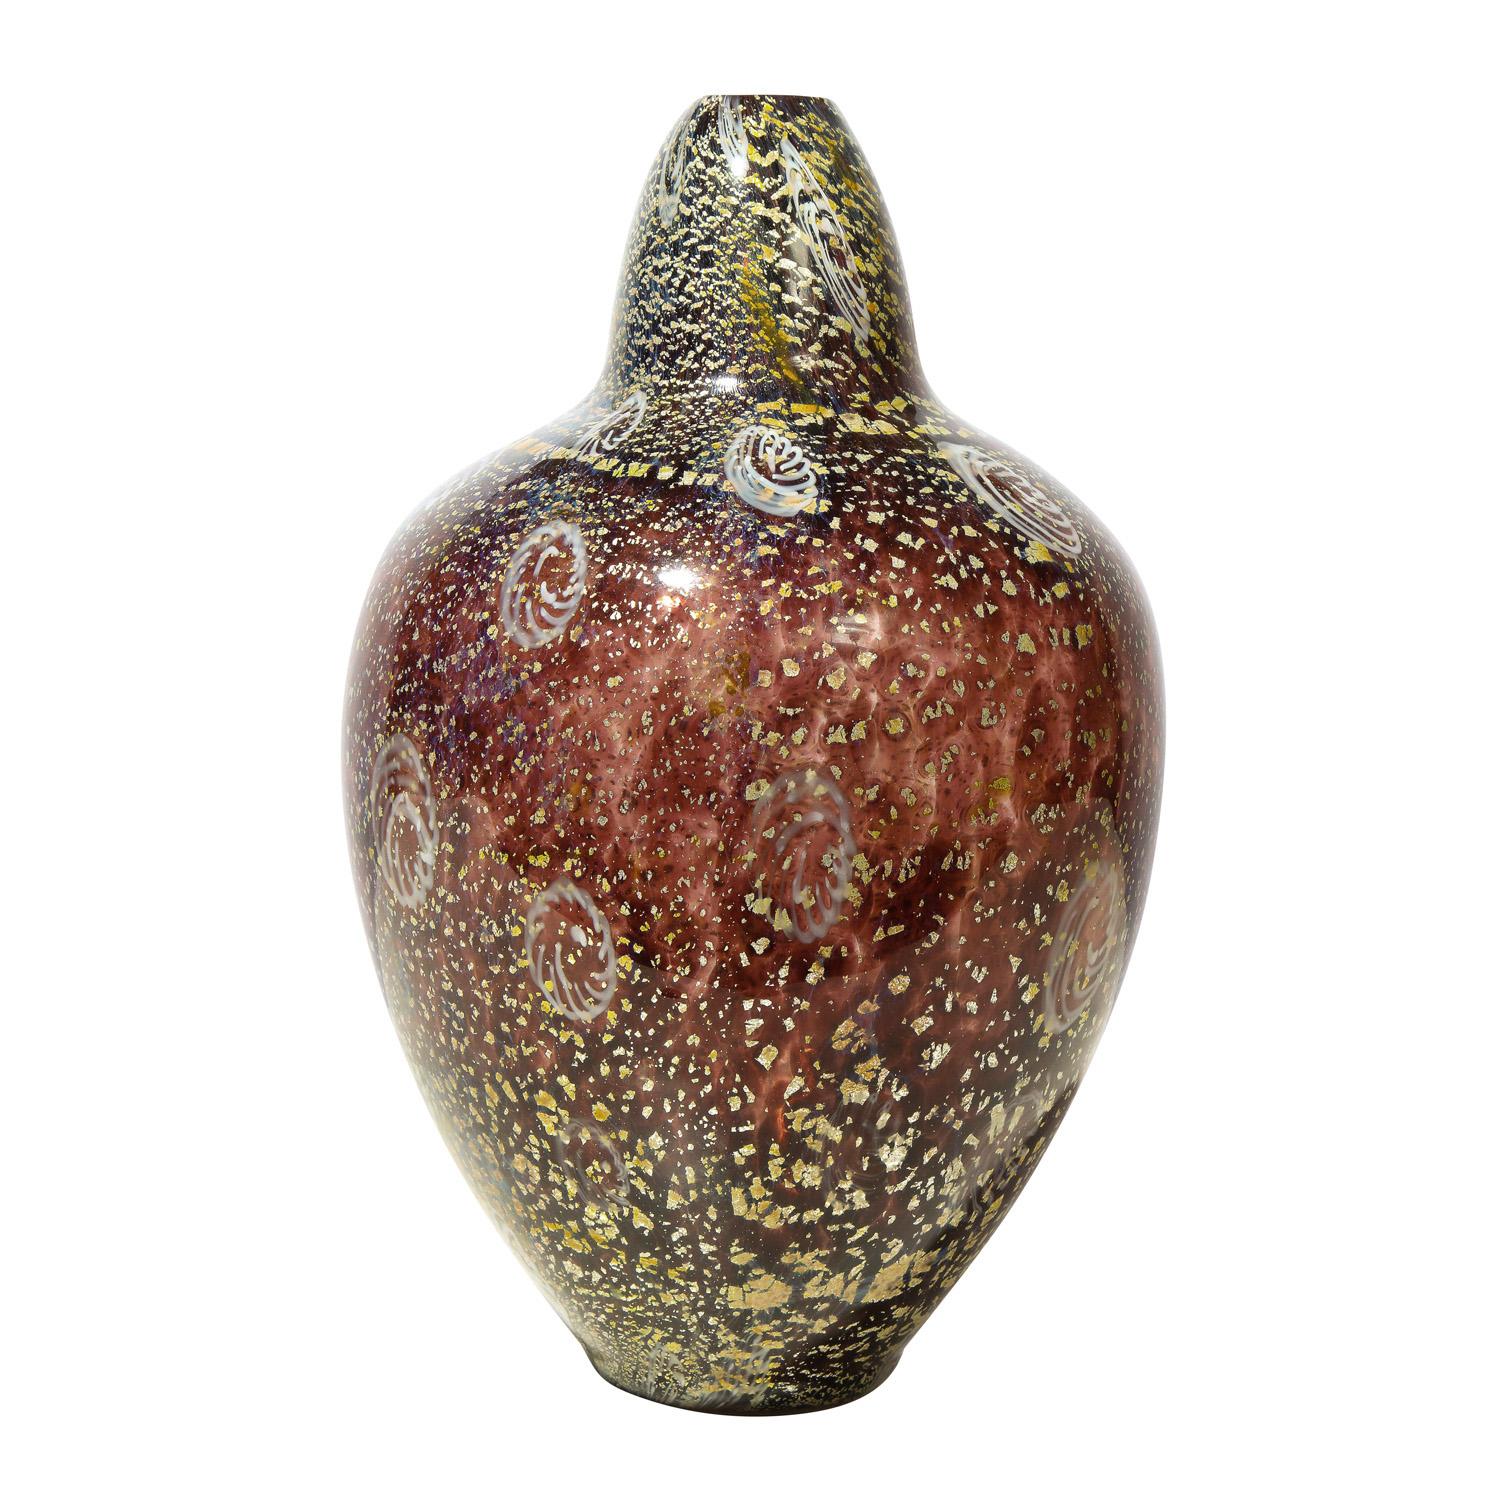 Hand-blown amber glass vase with gold foil and murrhines, from the Reazione Policrome Series, Ad Anelli by Giulio Radi for Arte Vetraria Muranese or A.V.E.M., Murano Italy, ca 1950.

Reference:
AVEM Artistic Production 1932-1972 by Marc Heiremans